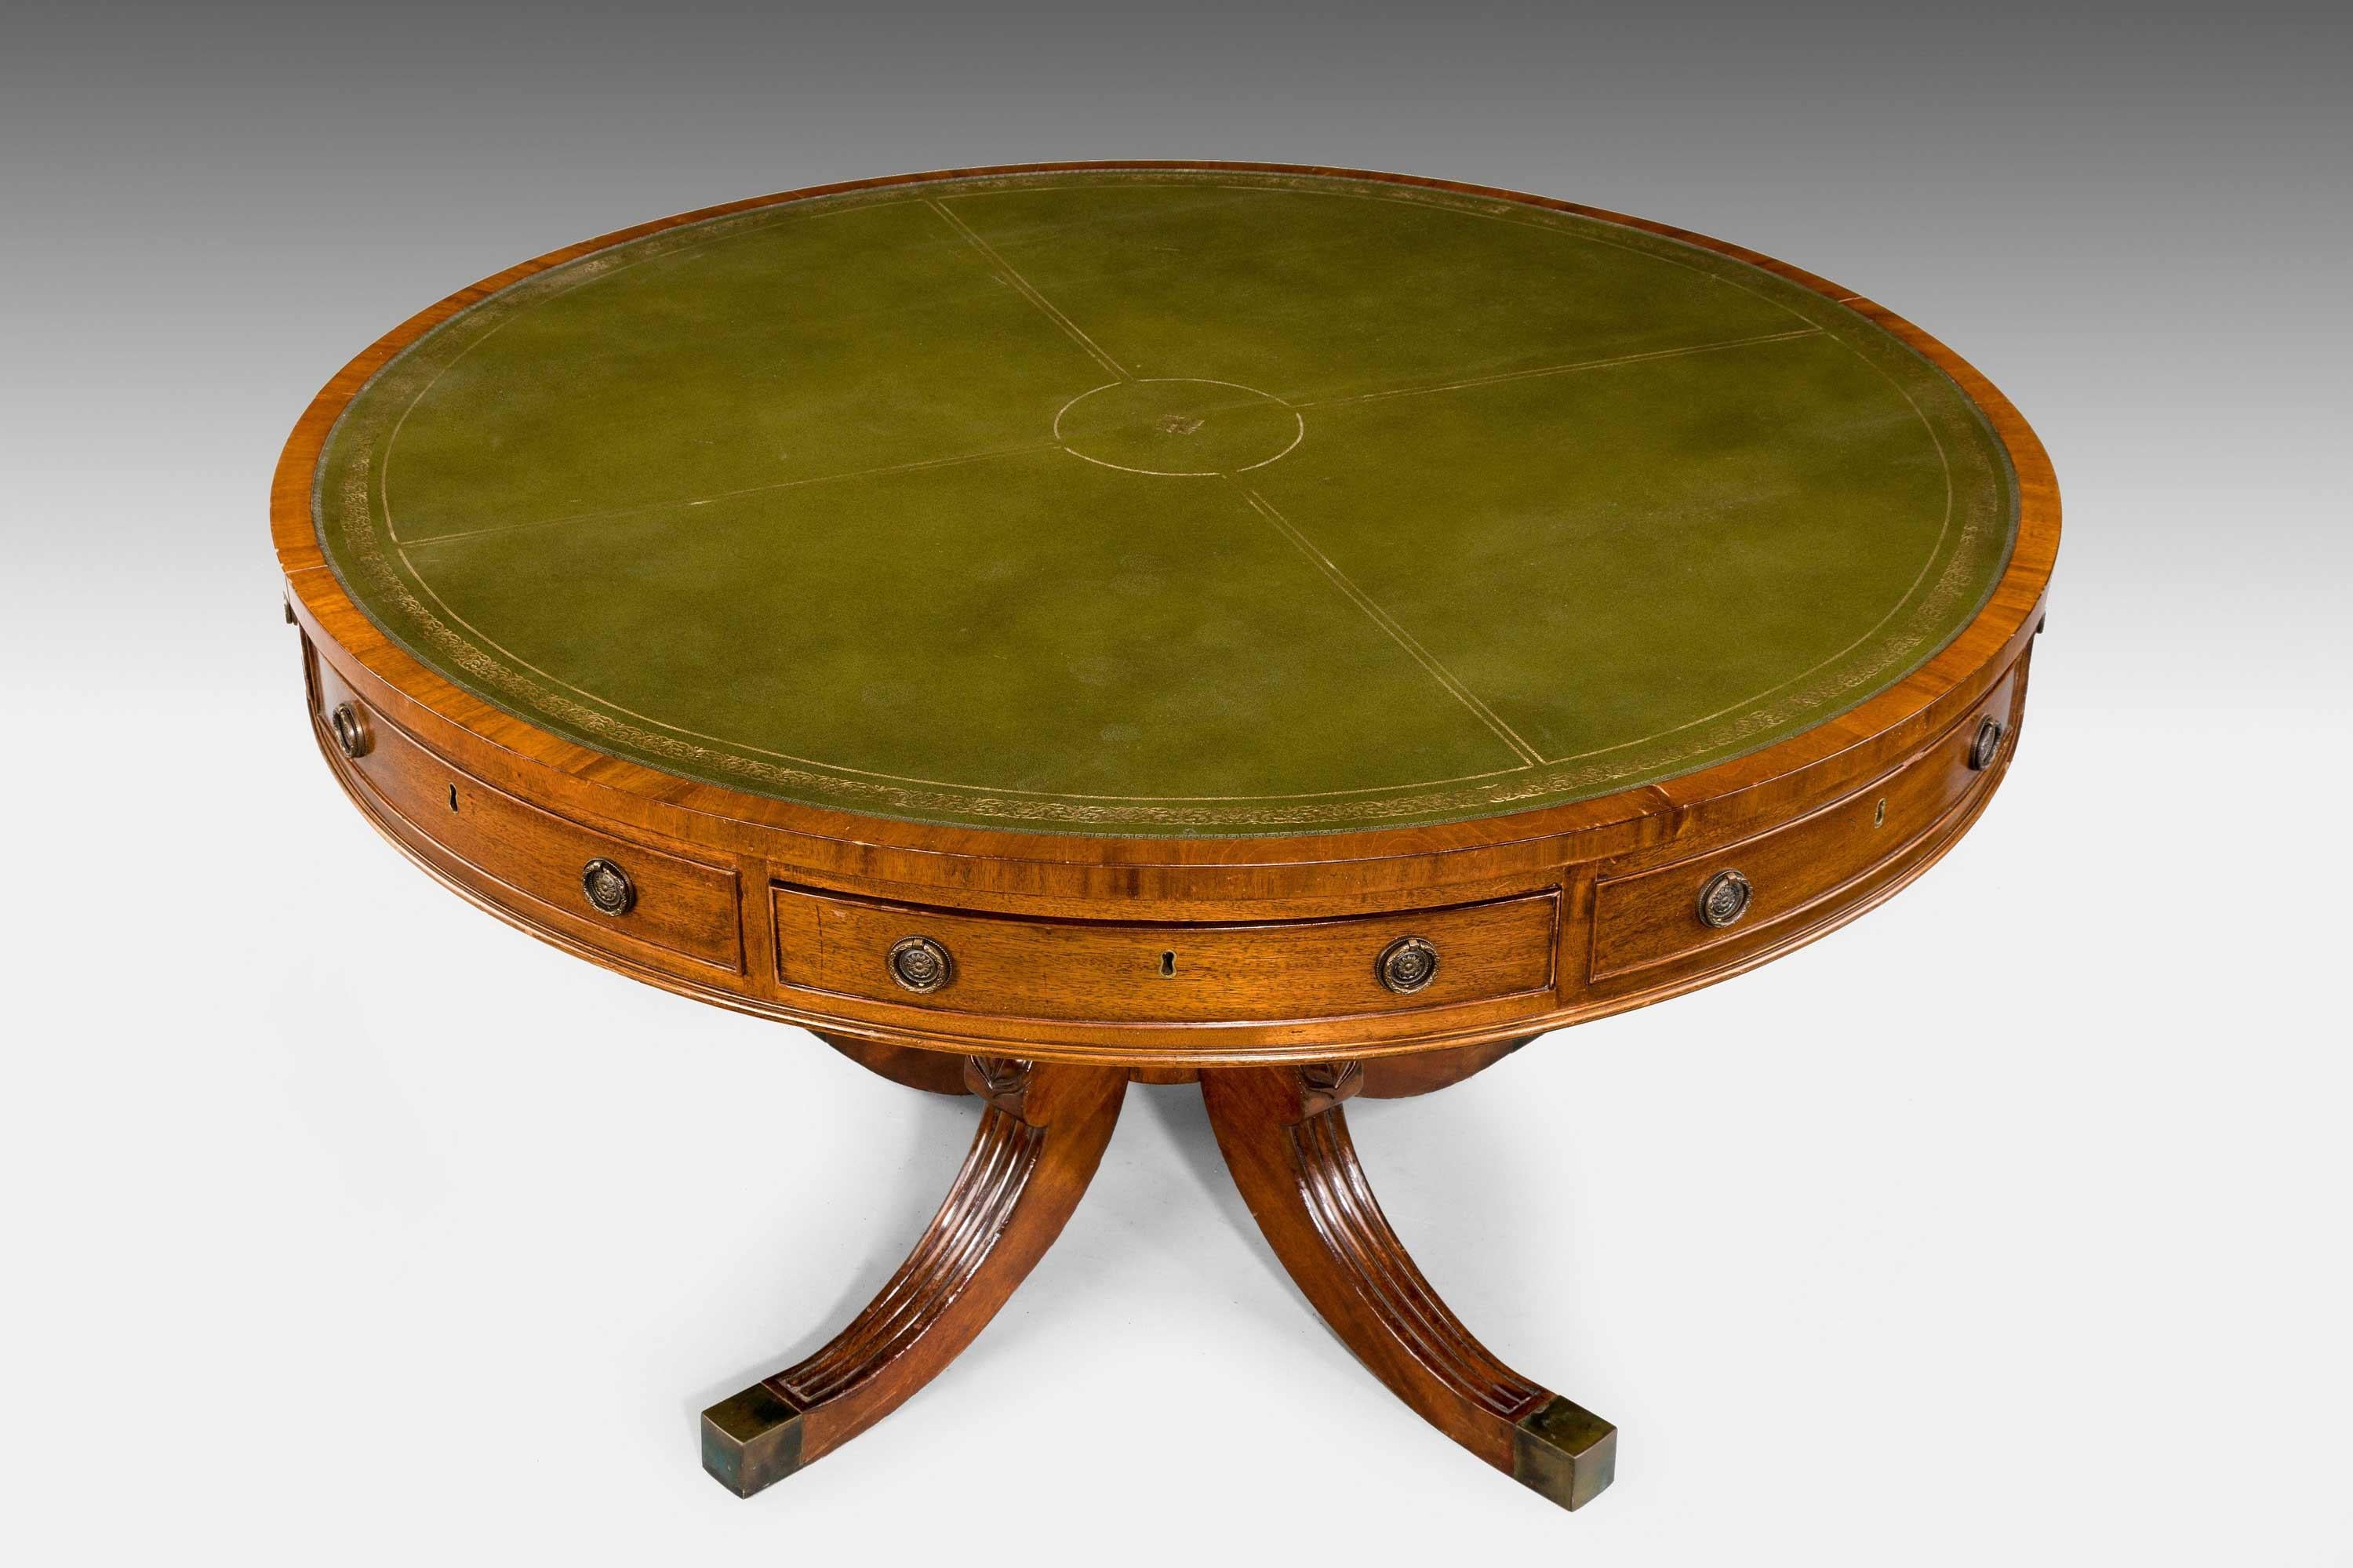 A very good Regency period circular drum or rent table with four real drawers and four mock drawers on very well carved baluster support with four shaped sabre legs reeded and carved.
 